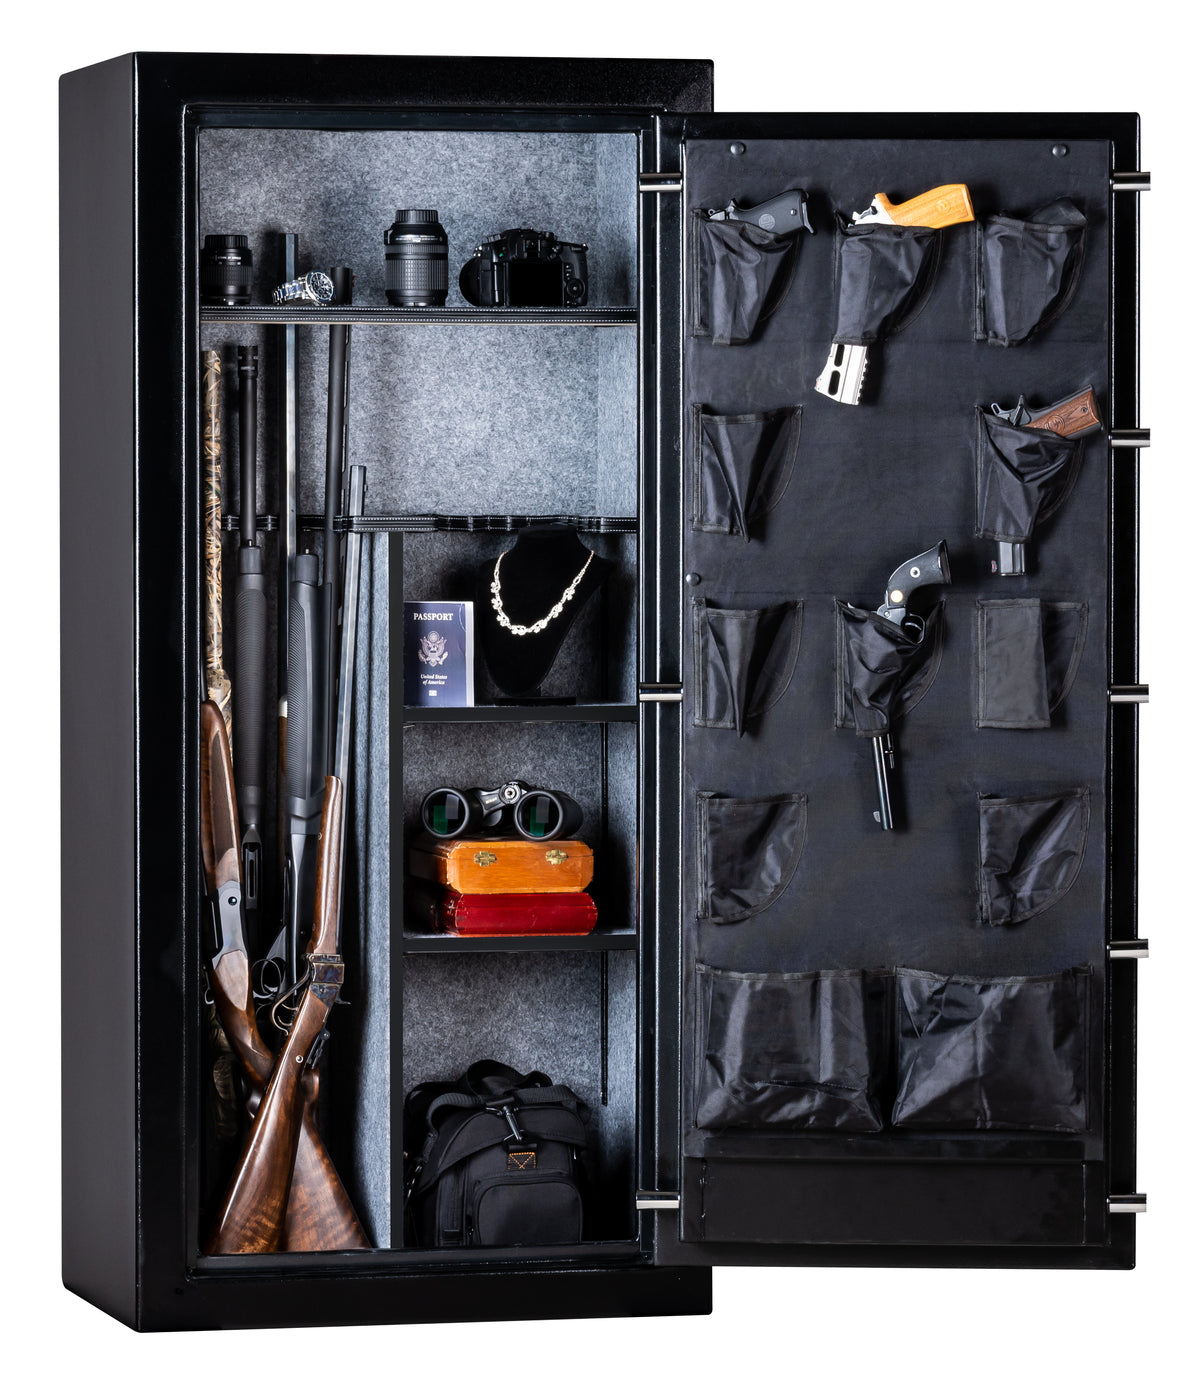 Rhino Basic | 24 | 40 Minute Fire Protection | Black | Chrome Electronic Lock | 60&quot;(H) x 28&quot;(W) x 20&quot;(D)